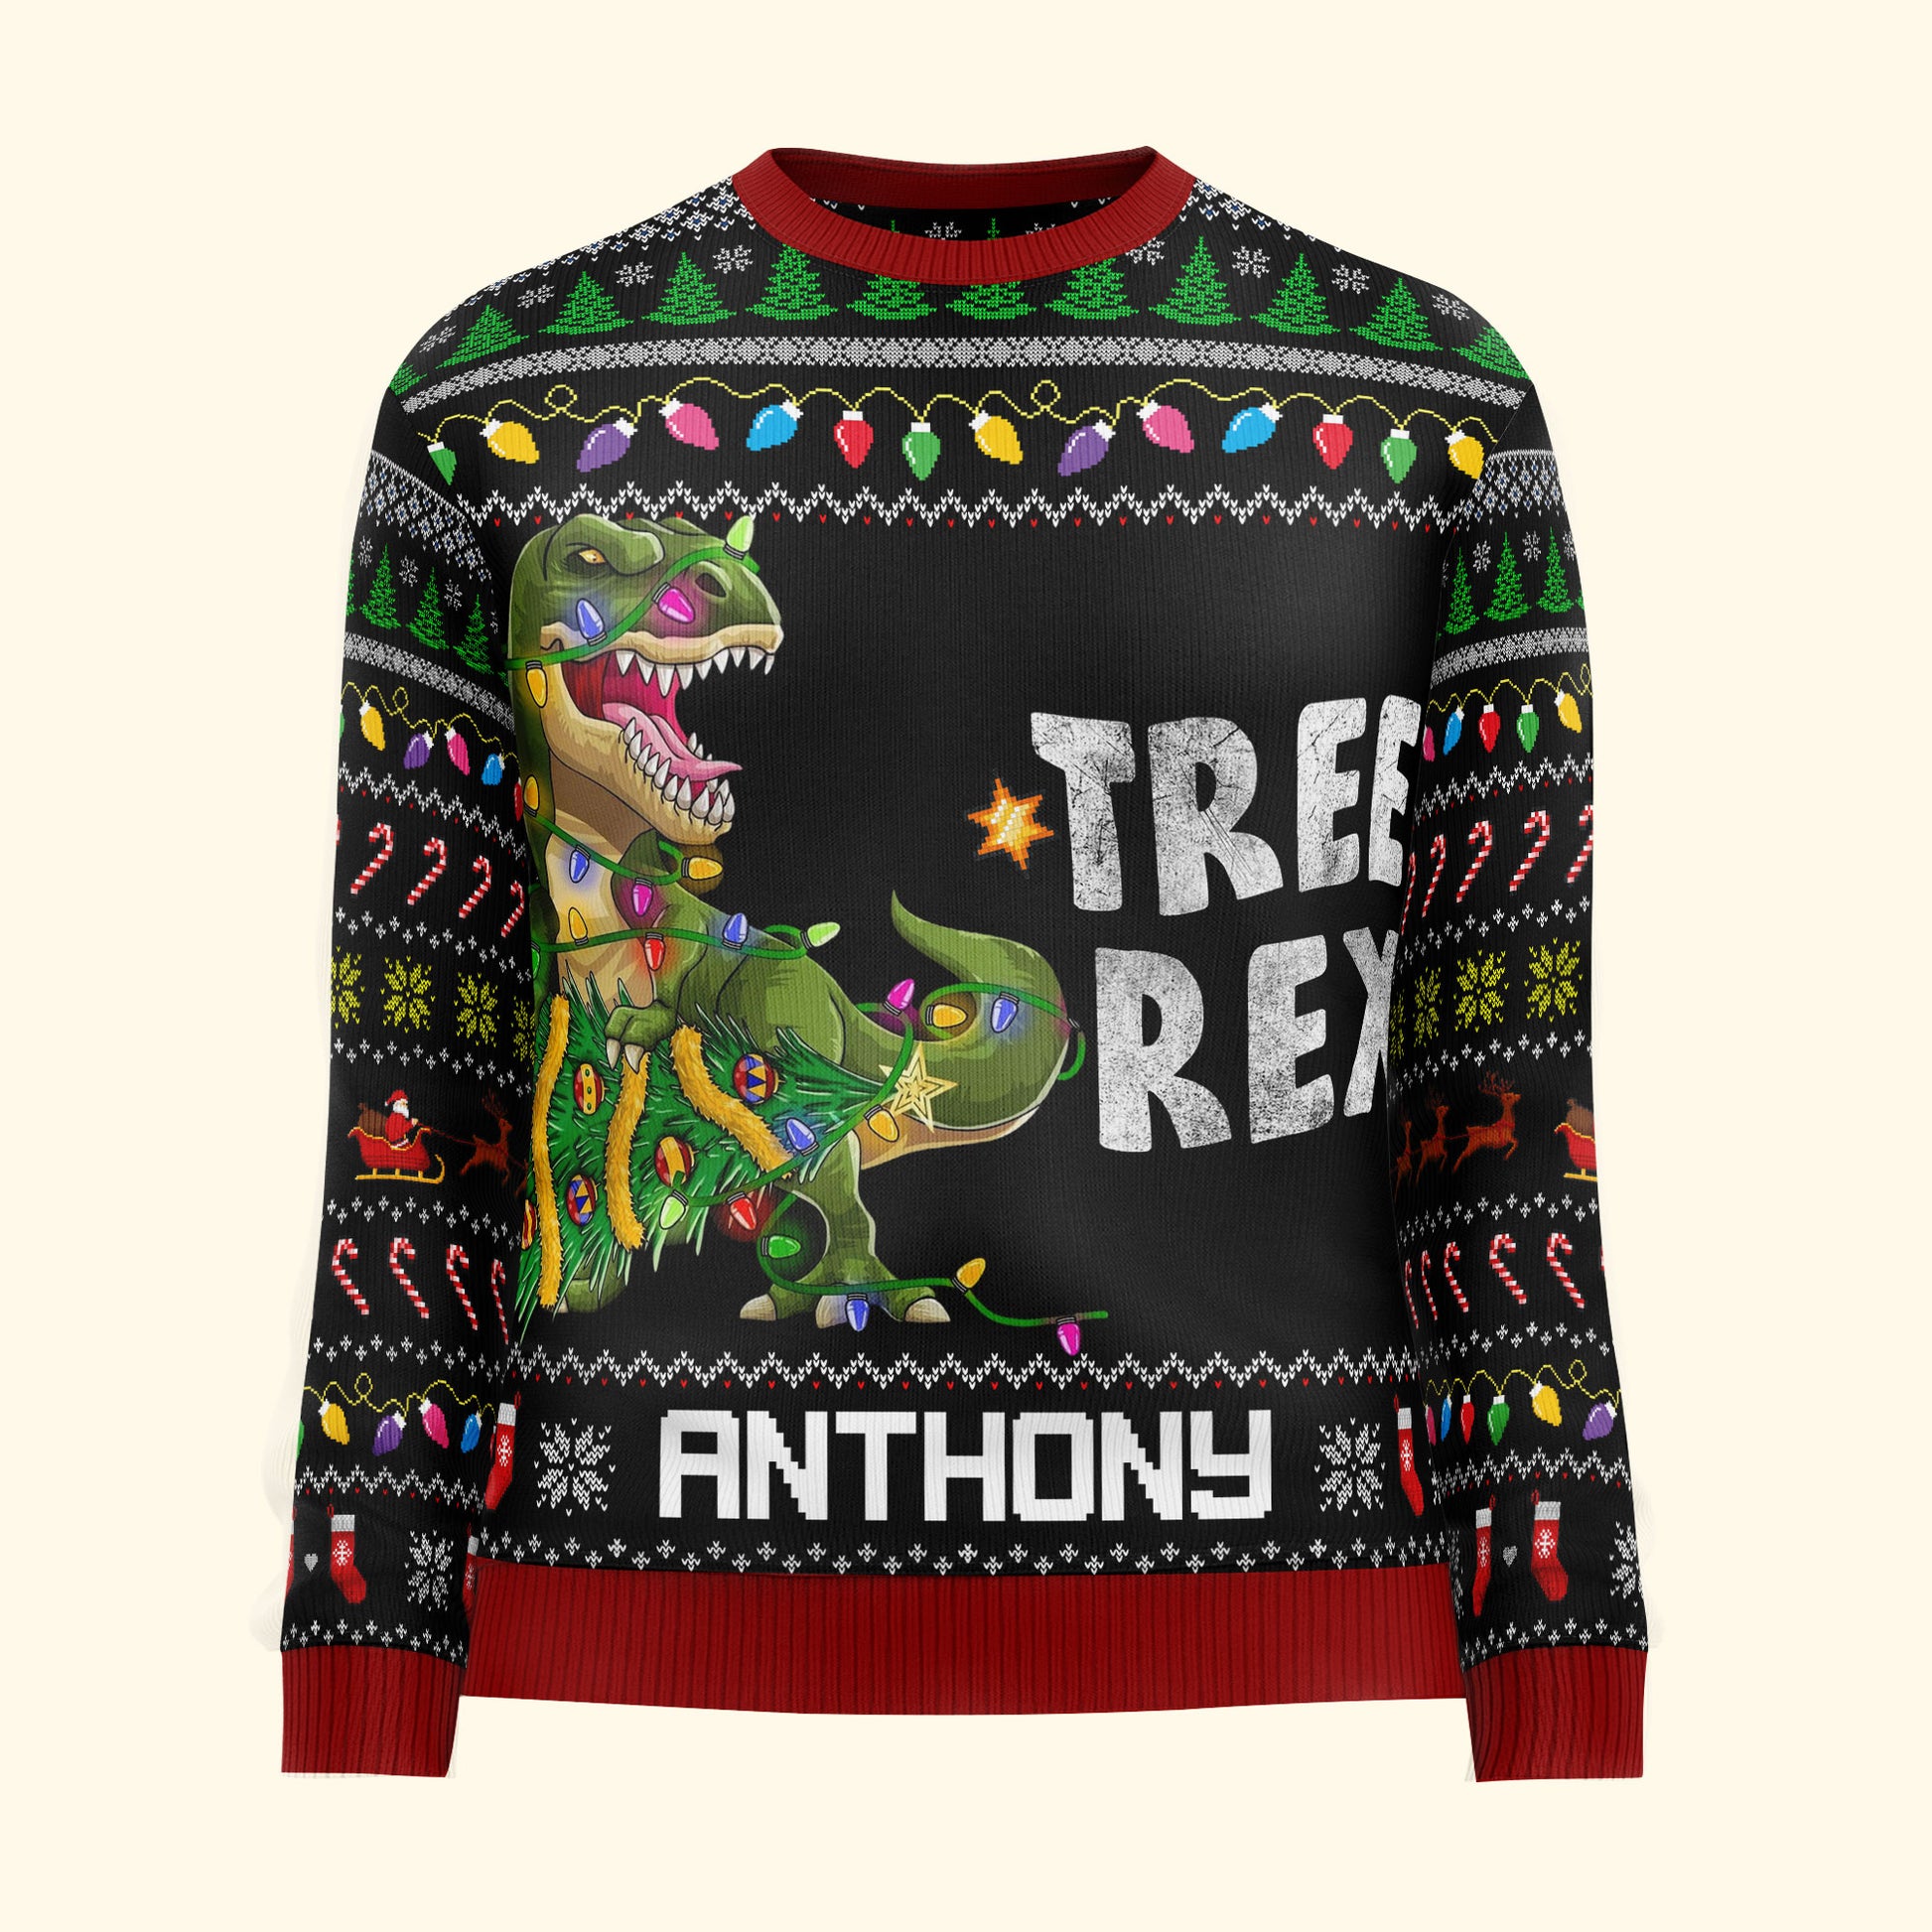 Tree Rex Custom Name - Personalized Ugly Sweater